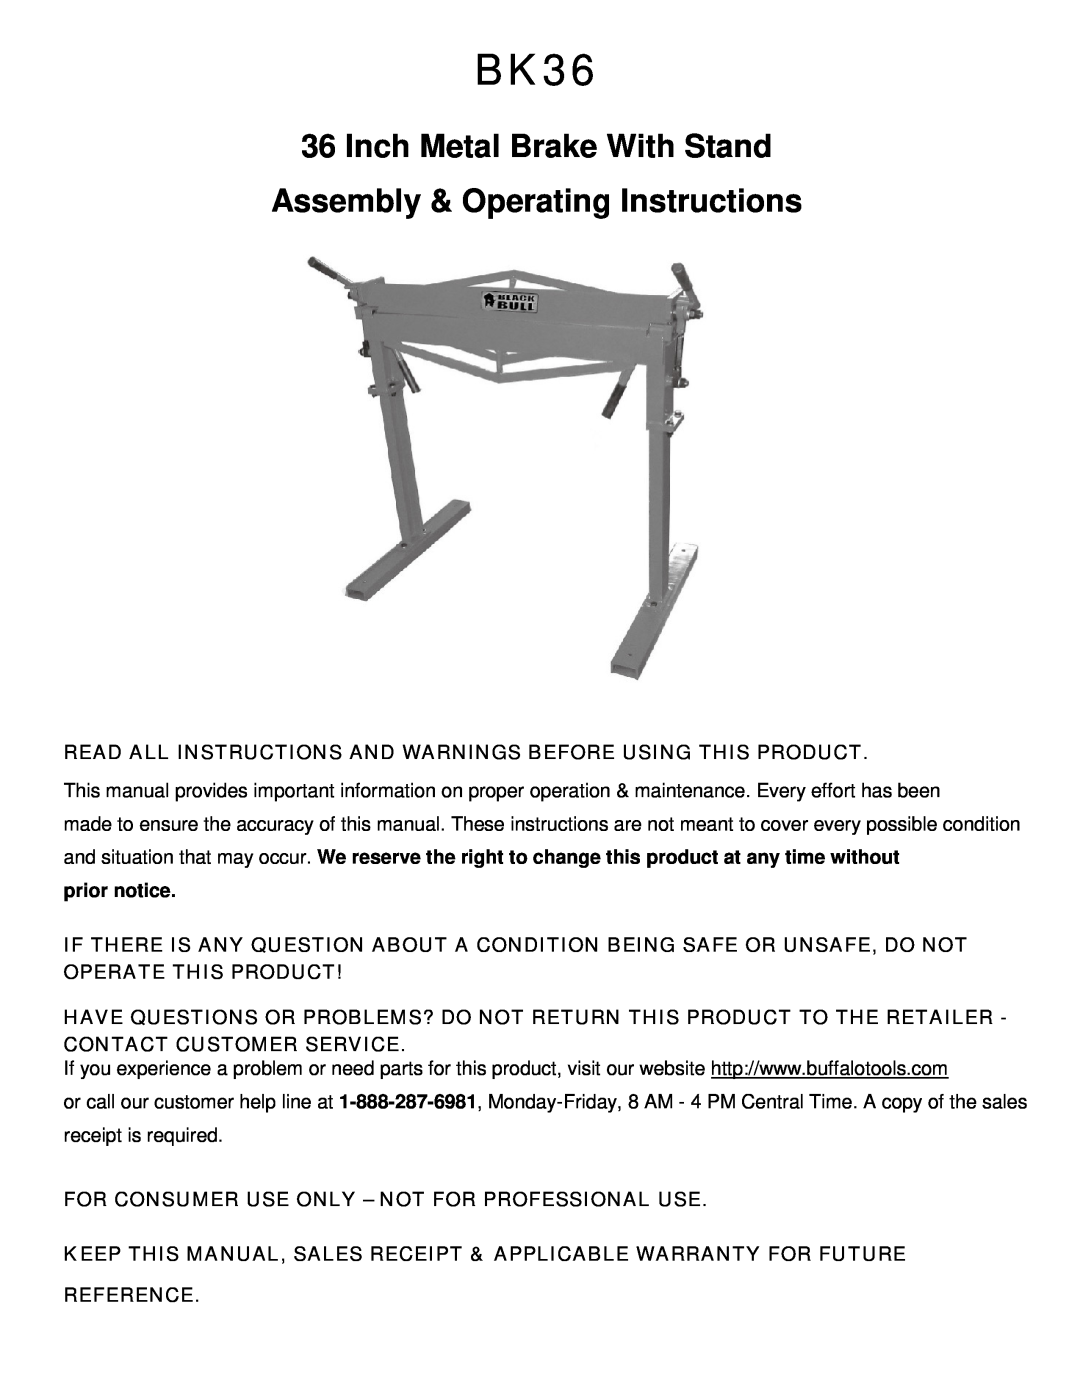 Buffalo Tools BK36 operating instructions Inch Metal Brake With Stand Assembly & Operating Instructions 